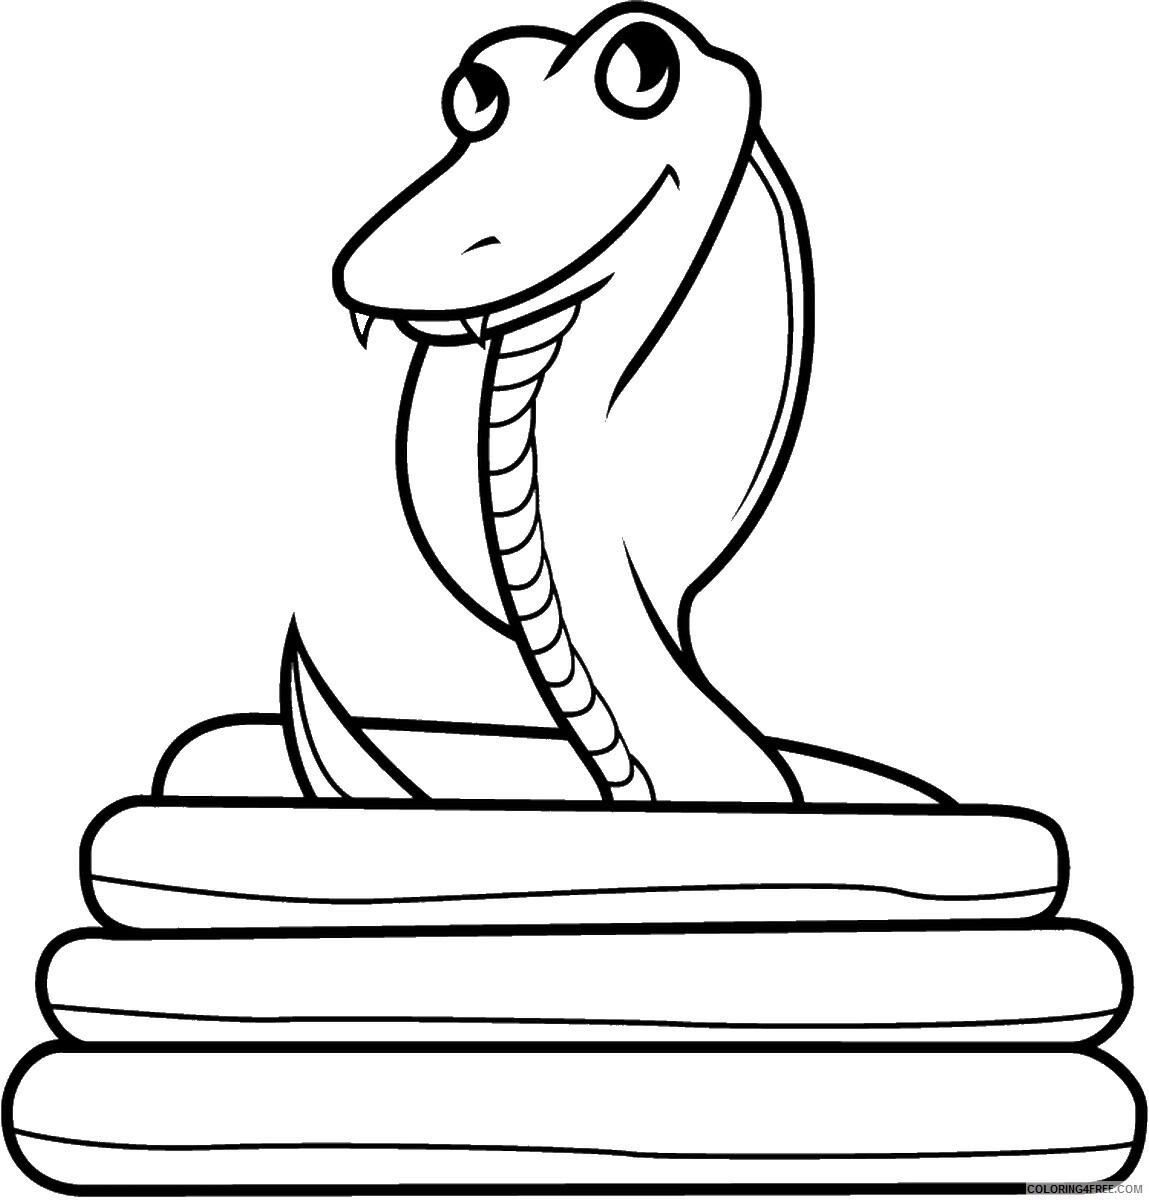 Snake Coloring Pages Animal Printable Sheets snake_cl_11 2021 4556 Coloring4free